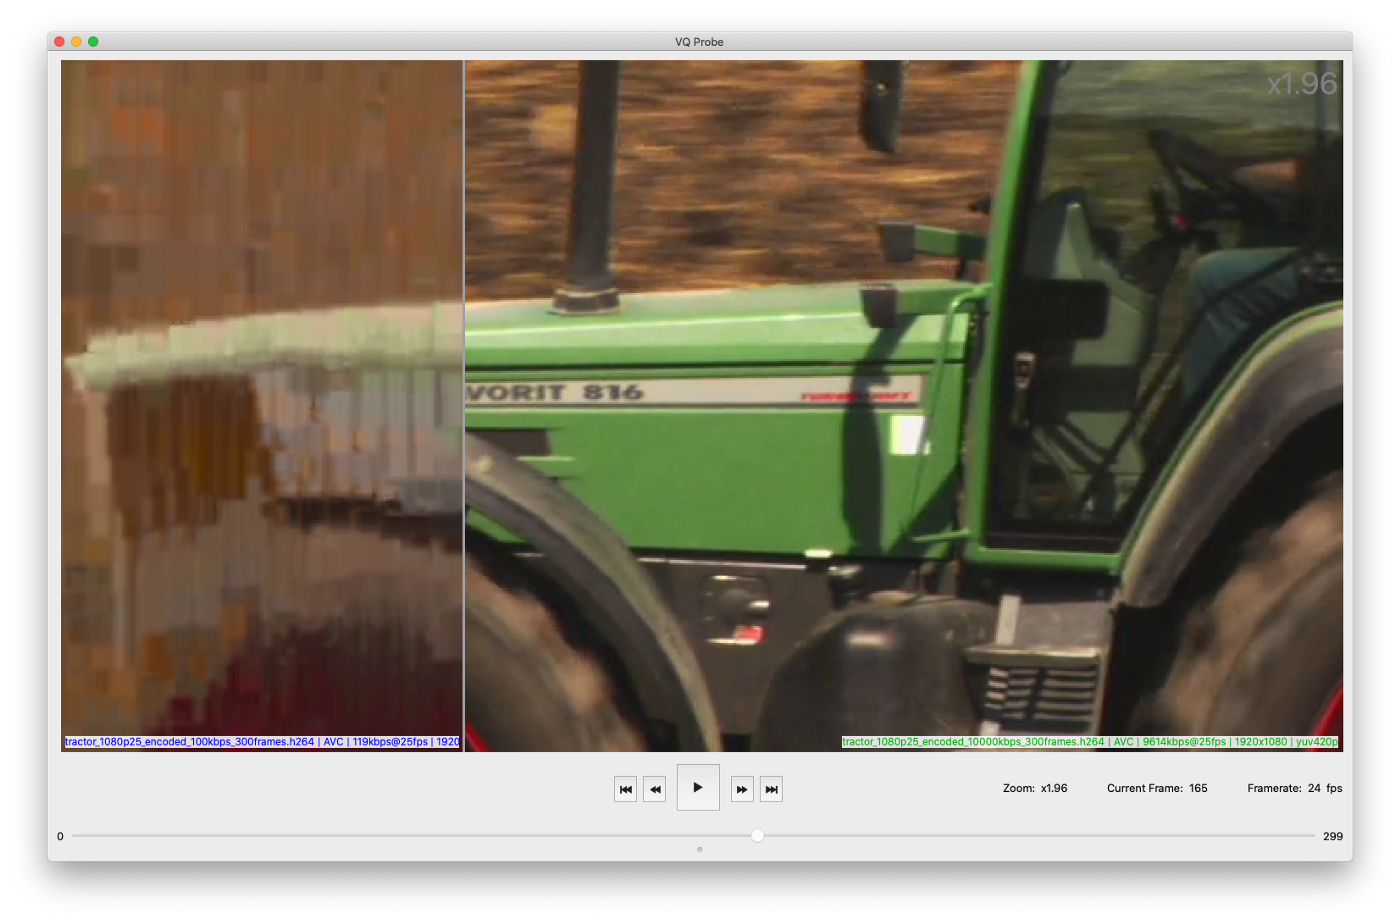 tractor_1080p25_encoded_100kbps_300frames.h264 vs. tractor_1080p25_encoded_10000kbps_300frames.h264